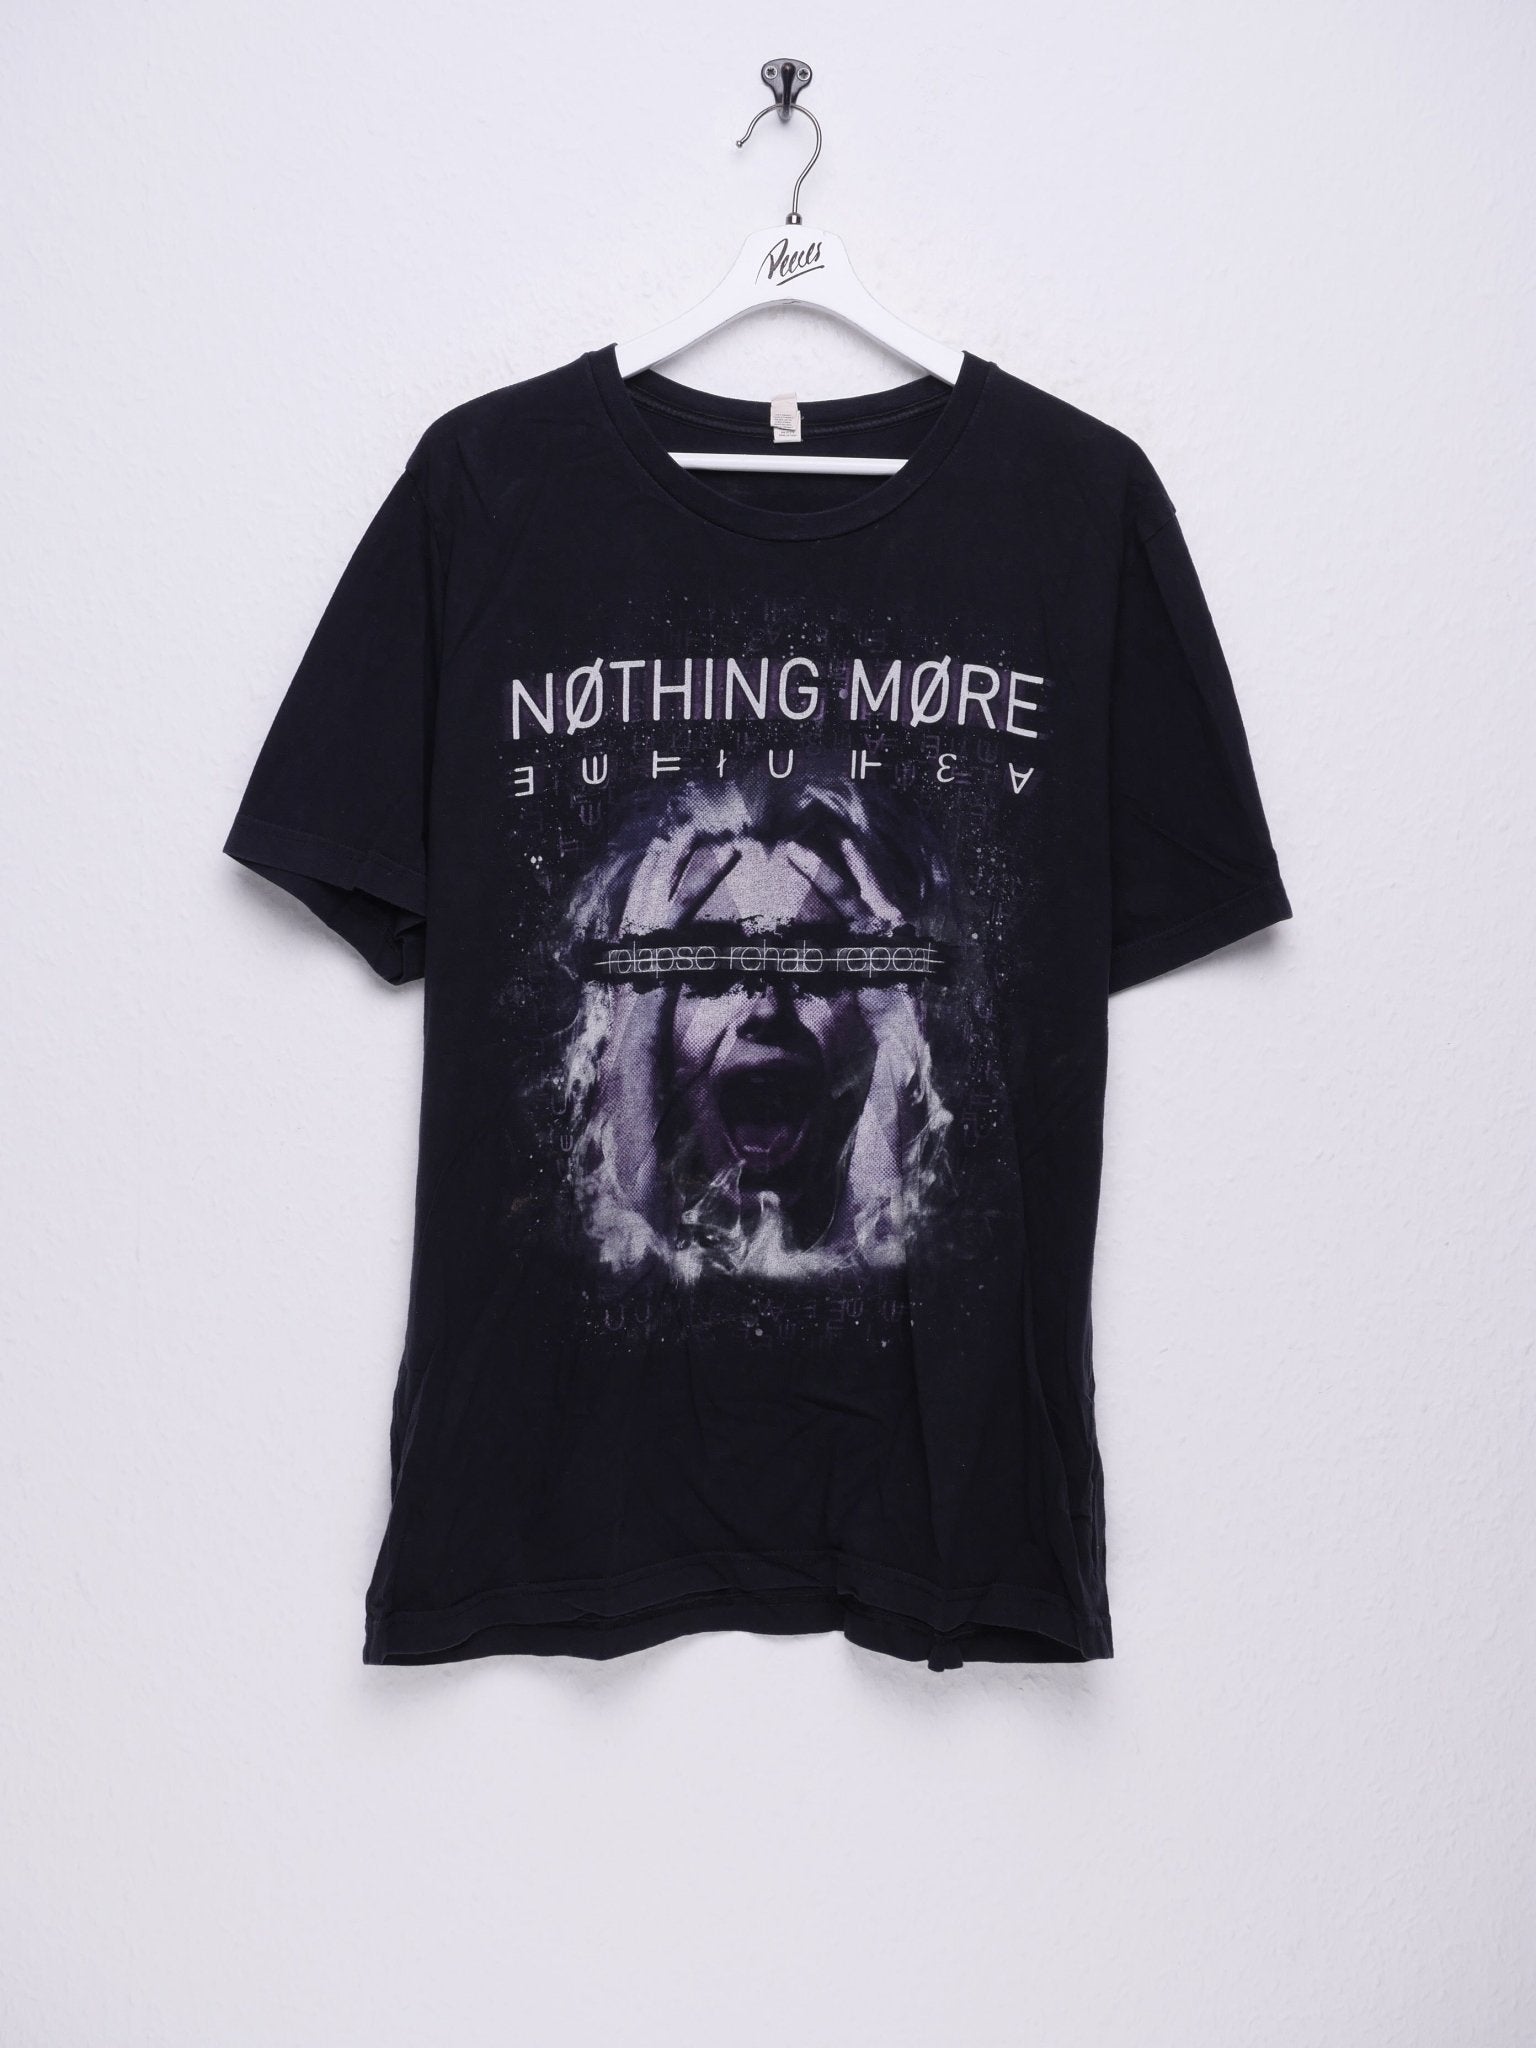 printed Graphic 'Jenny Nothing More' 2015 Tour Shirt - Peeces